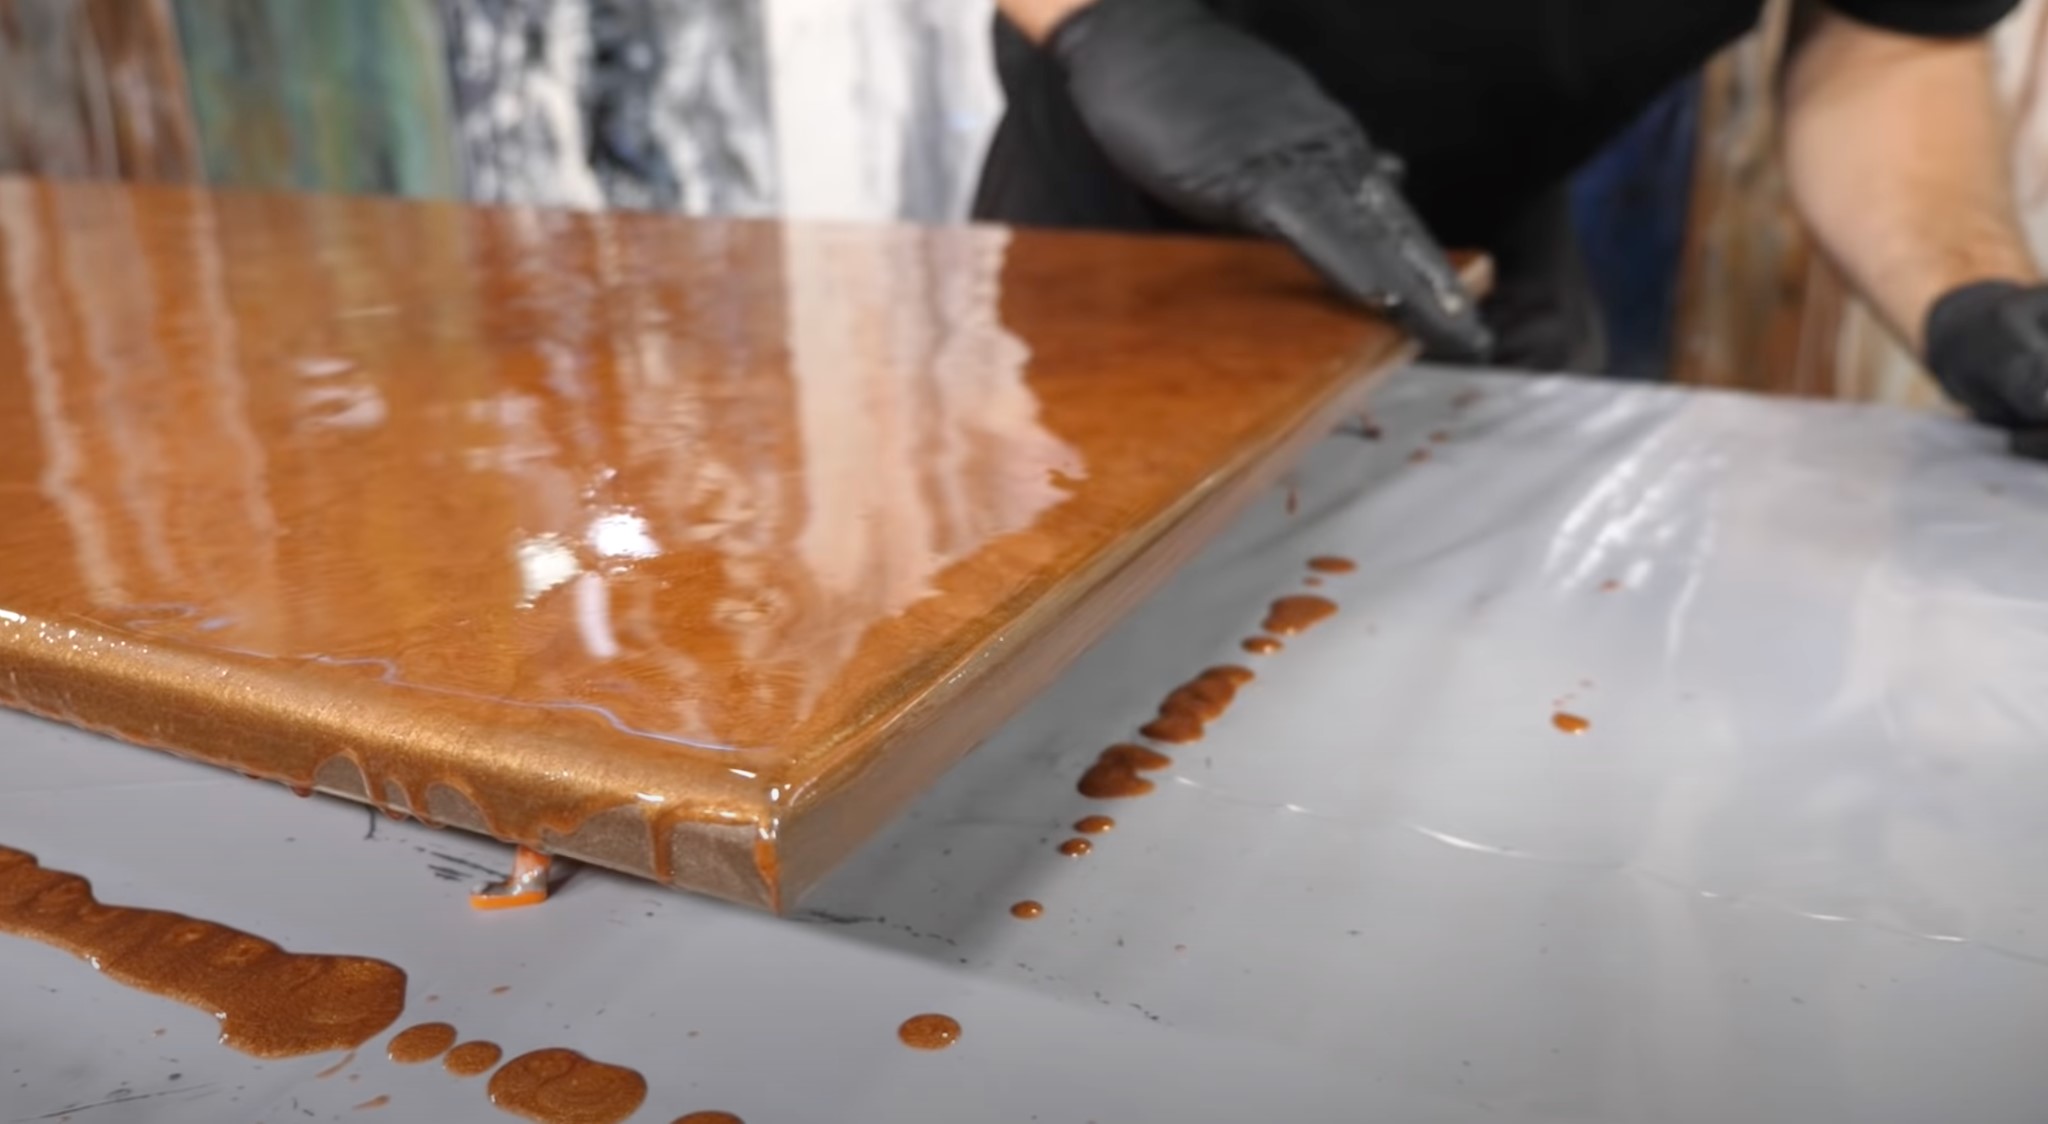 Using a gloved hand to even epoxy